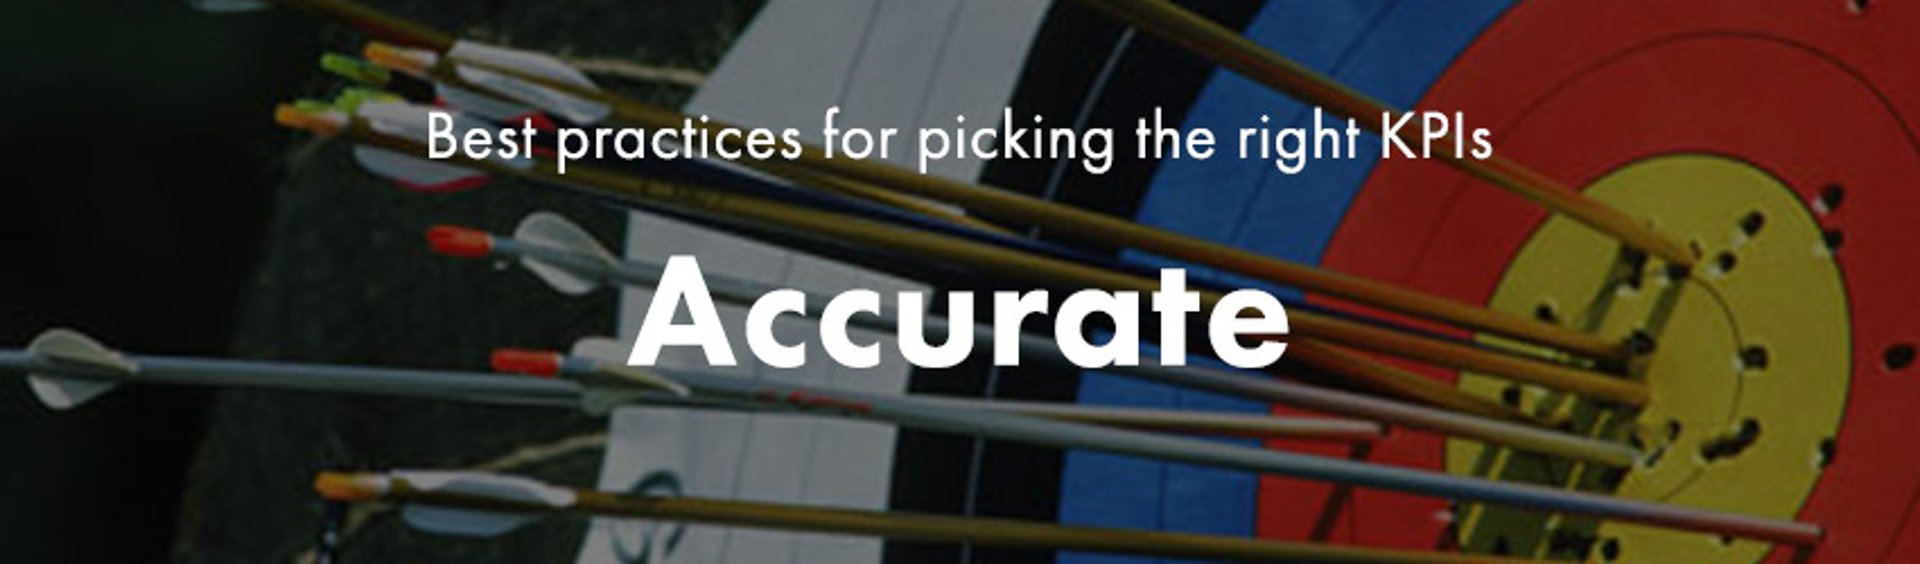 Picking Kpis Best Practices Accurate